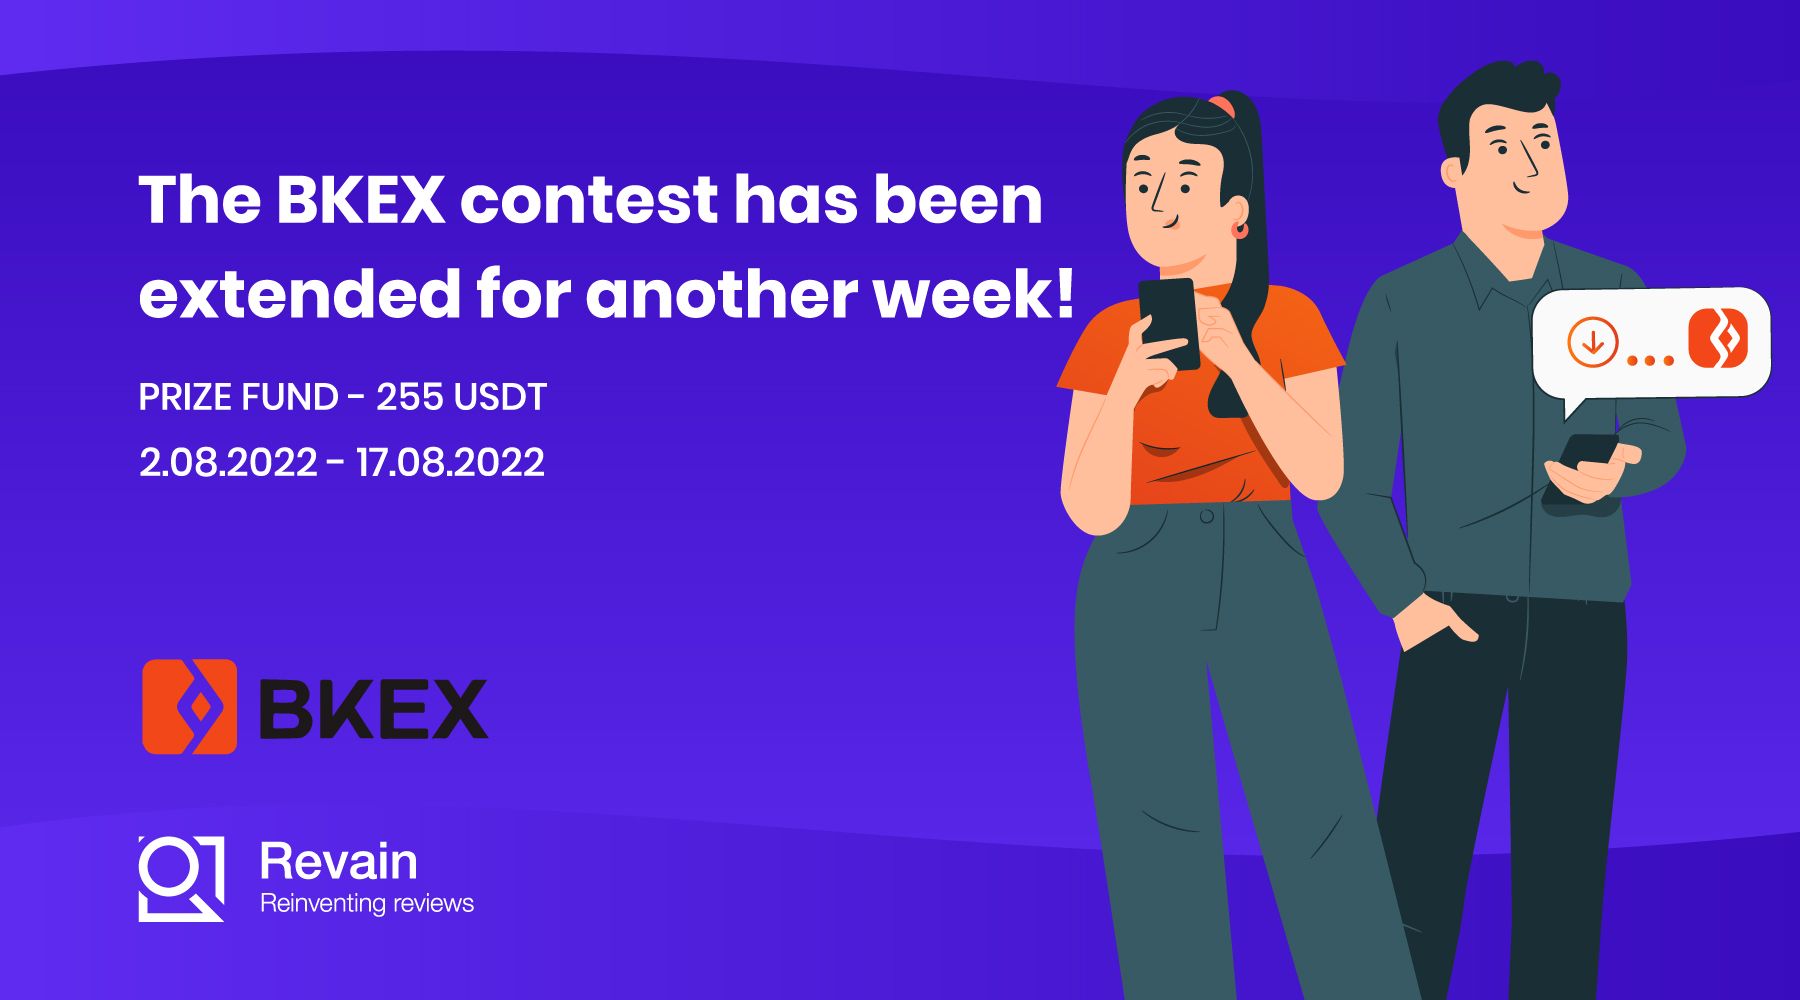 The BKEX contest has been extended for another week!